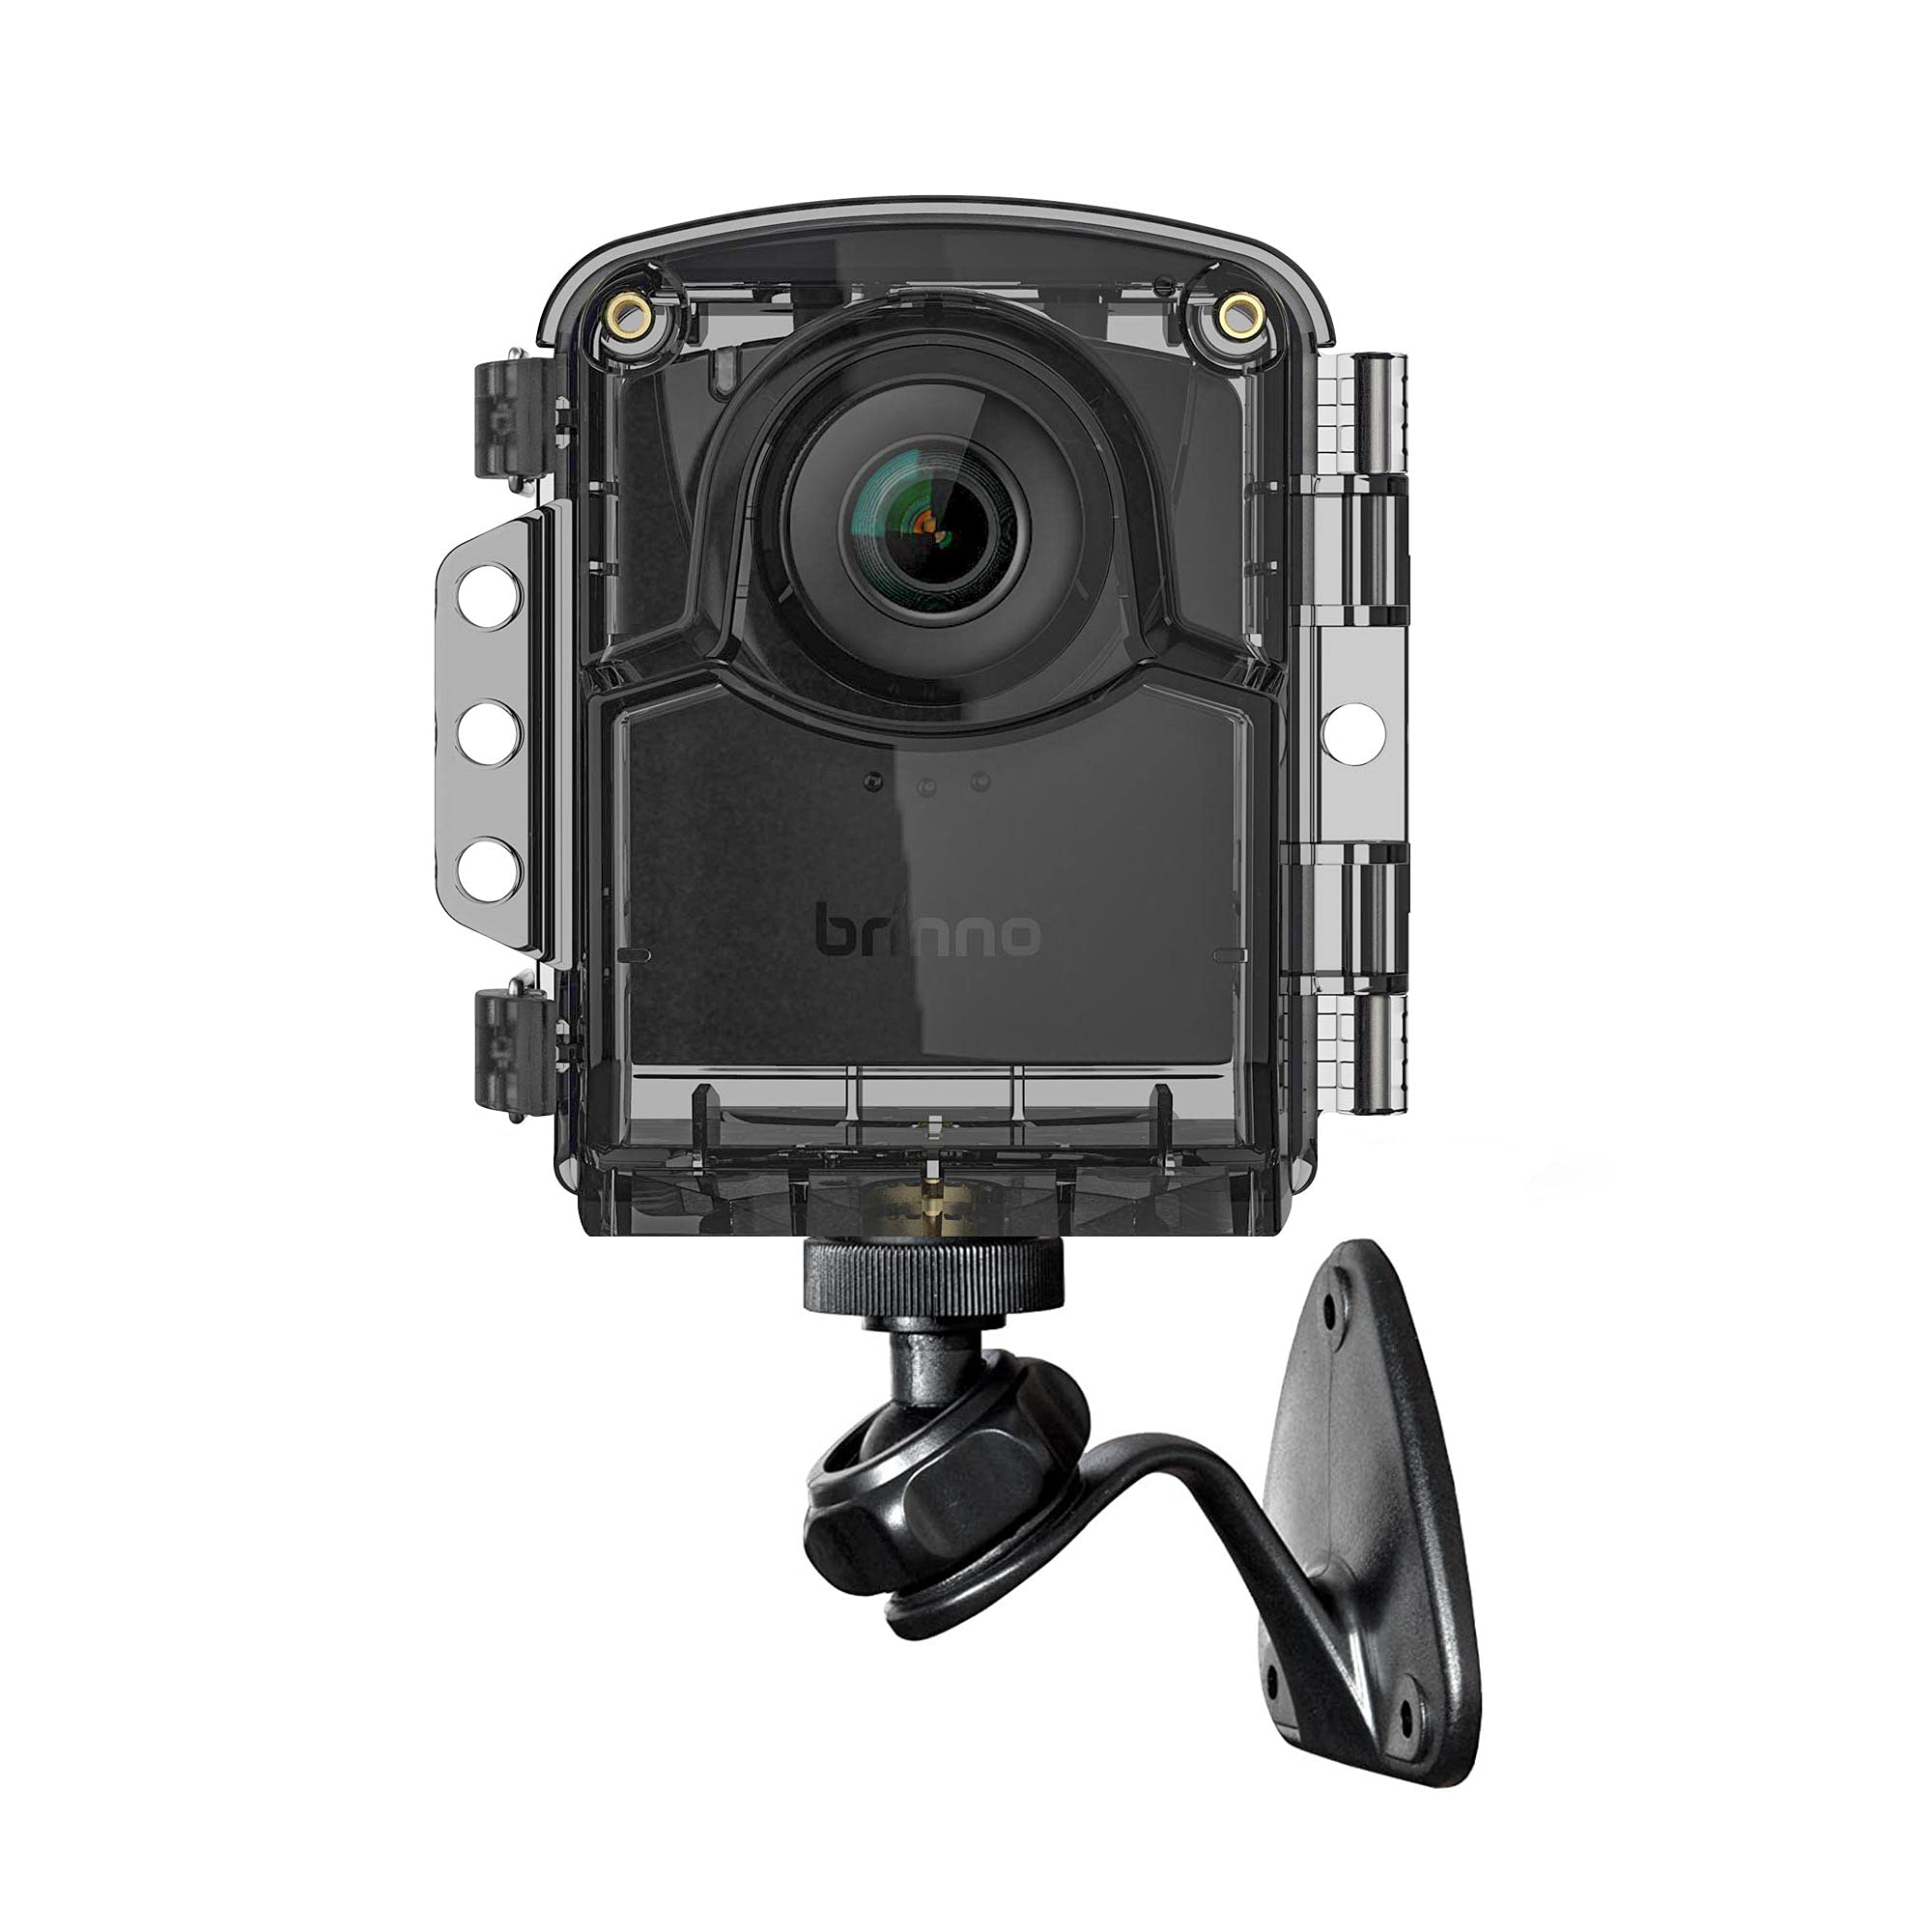 Brinno Empower TLC2020 Time Lapse Camera Outdoor Construction & ATH1000, New Quick Menu, Step Video & Stop Motion Capture Modes in HDR and FHD, Long-Lasting Battery, Weatherproof